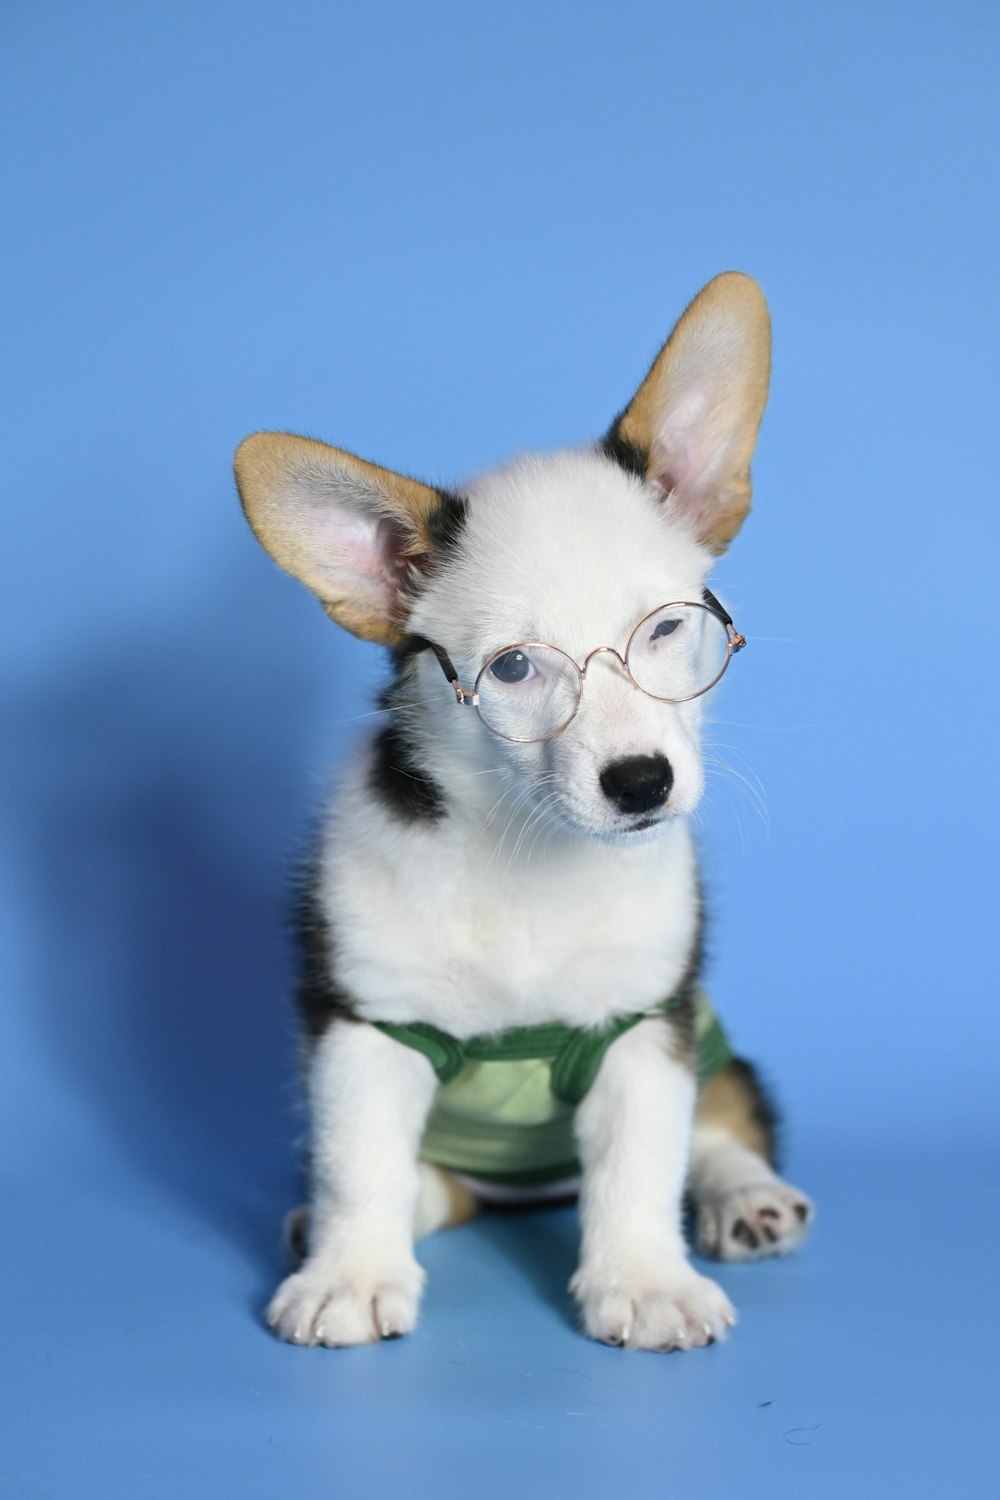 a small dog wearing a green shirt and glasses